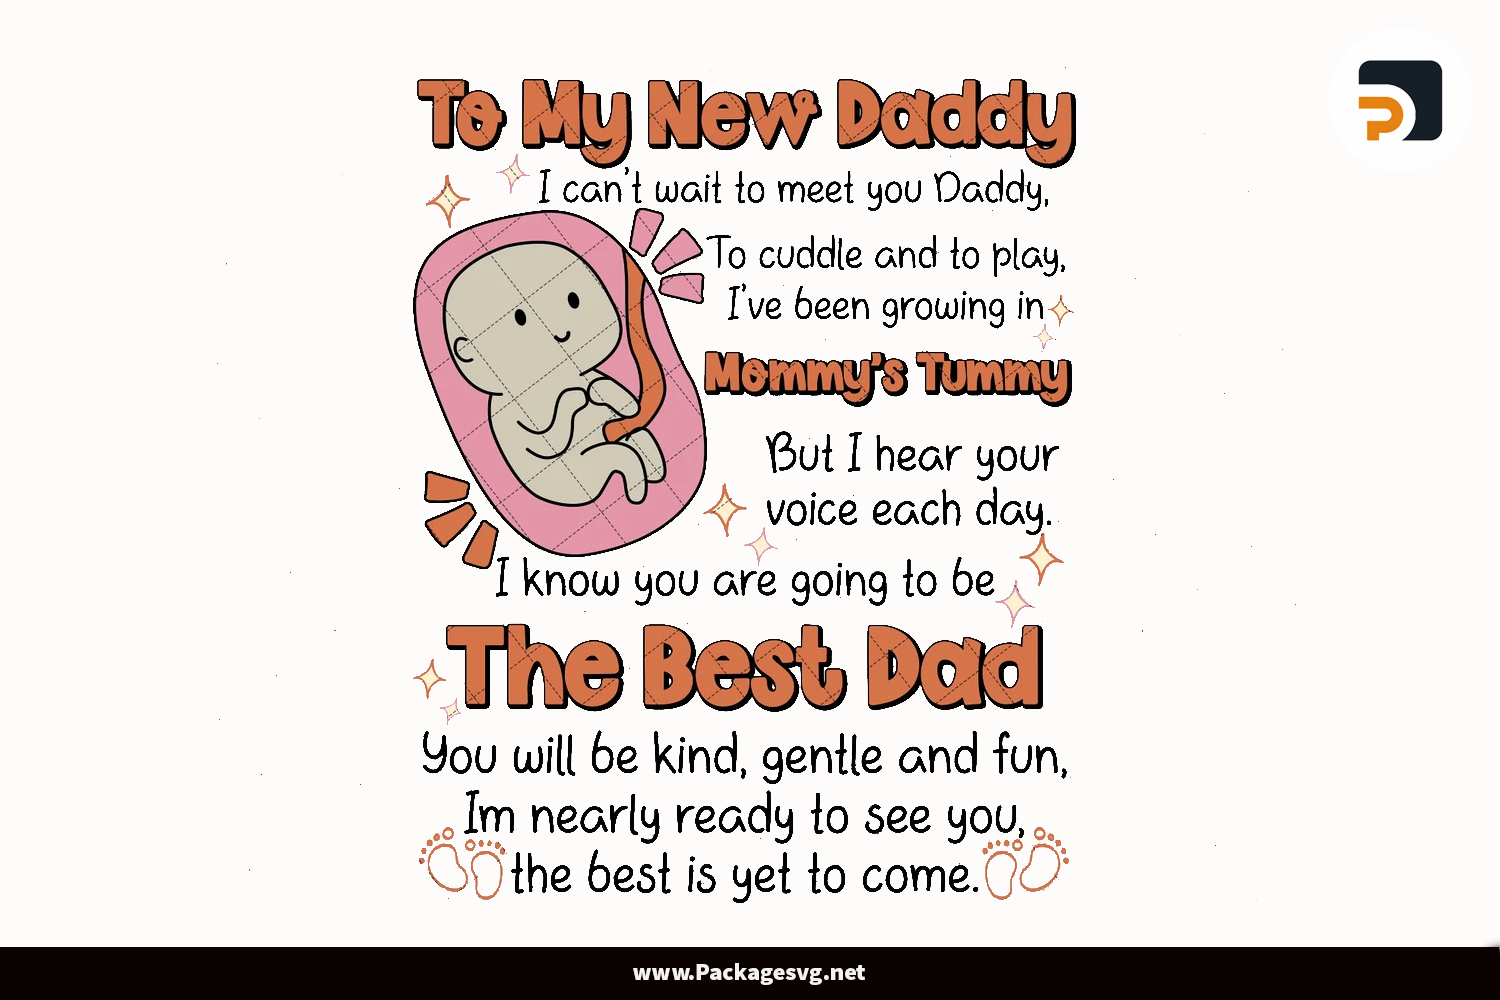 To My New Daddy